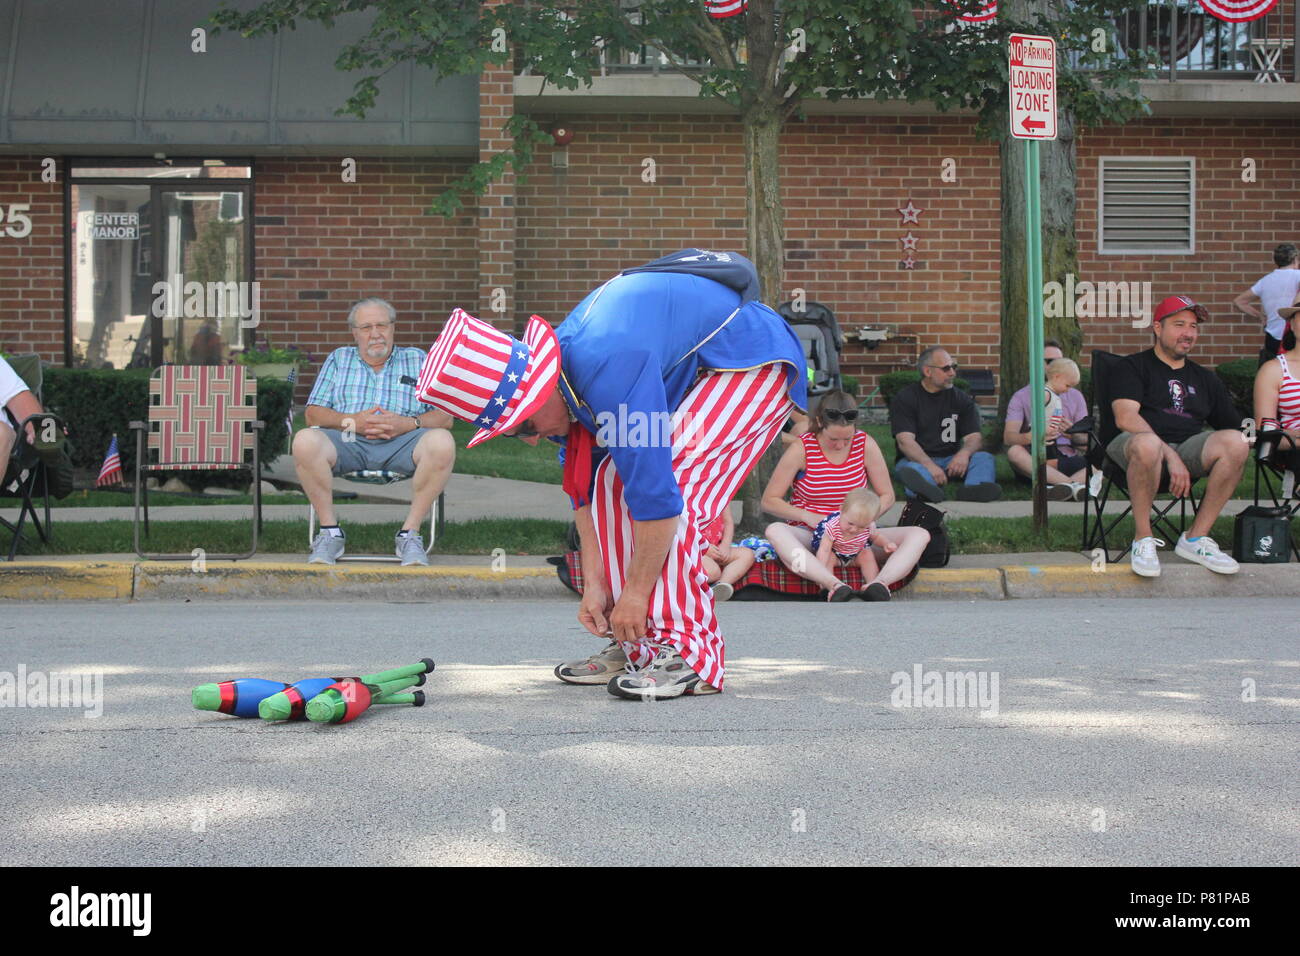 Juggler dressed up in a red white and blue Uncle Sam outfit and